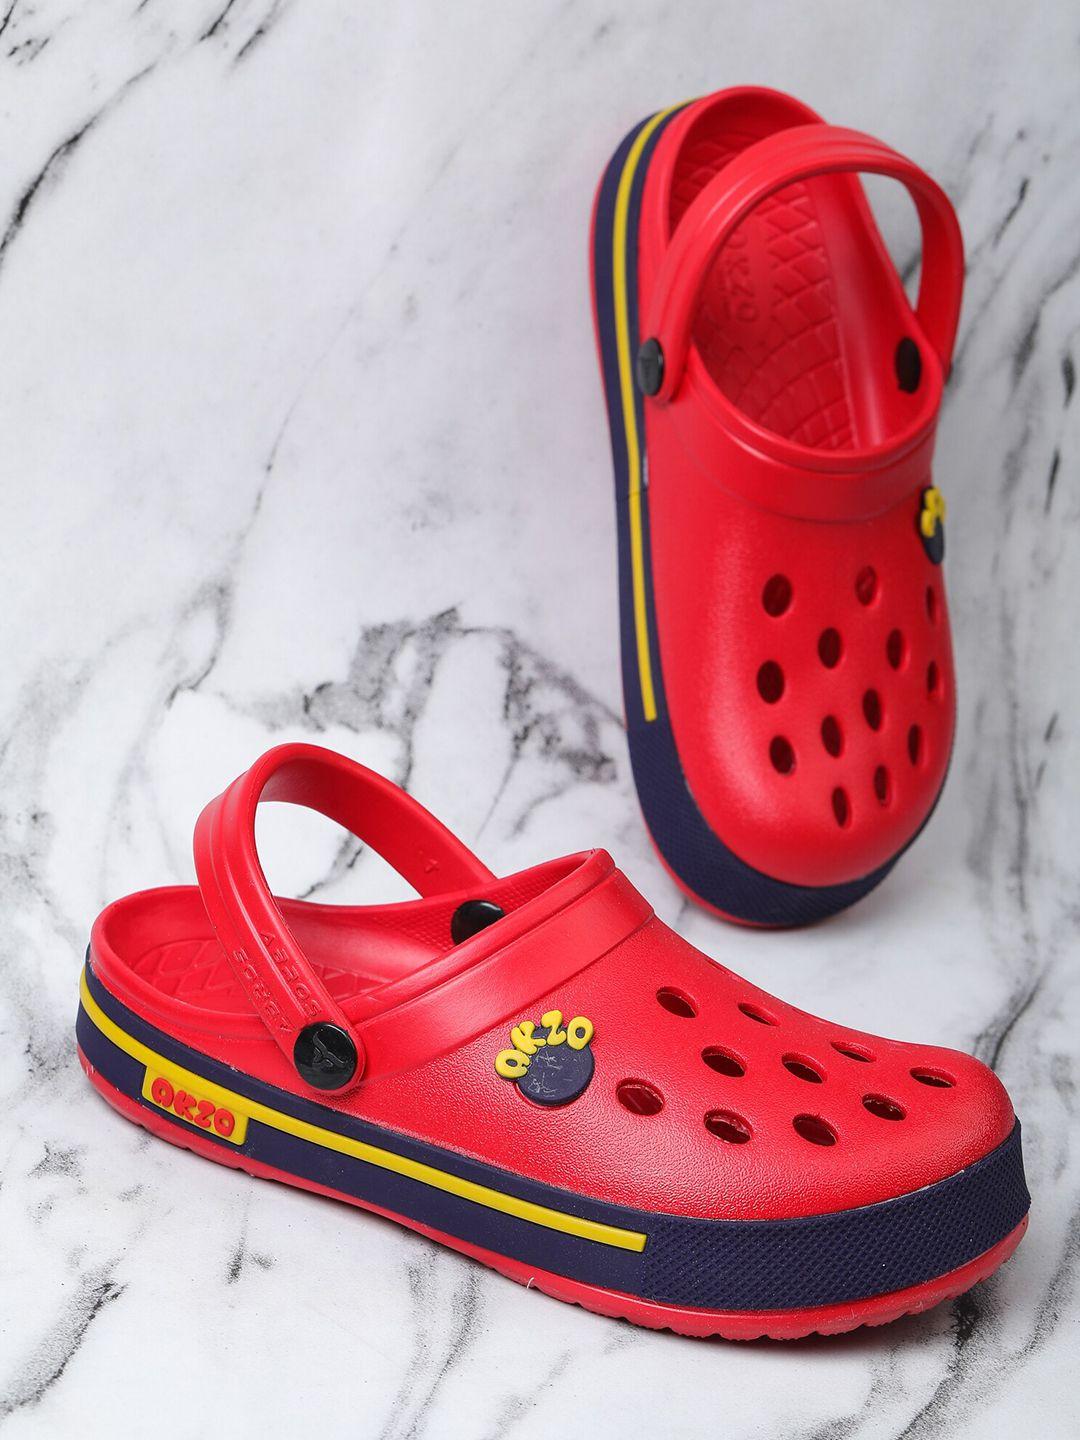 abros boys red & blue rubber clogs